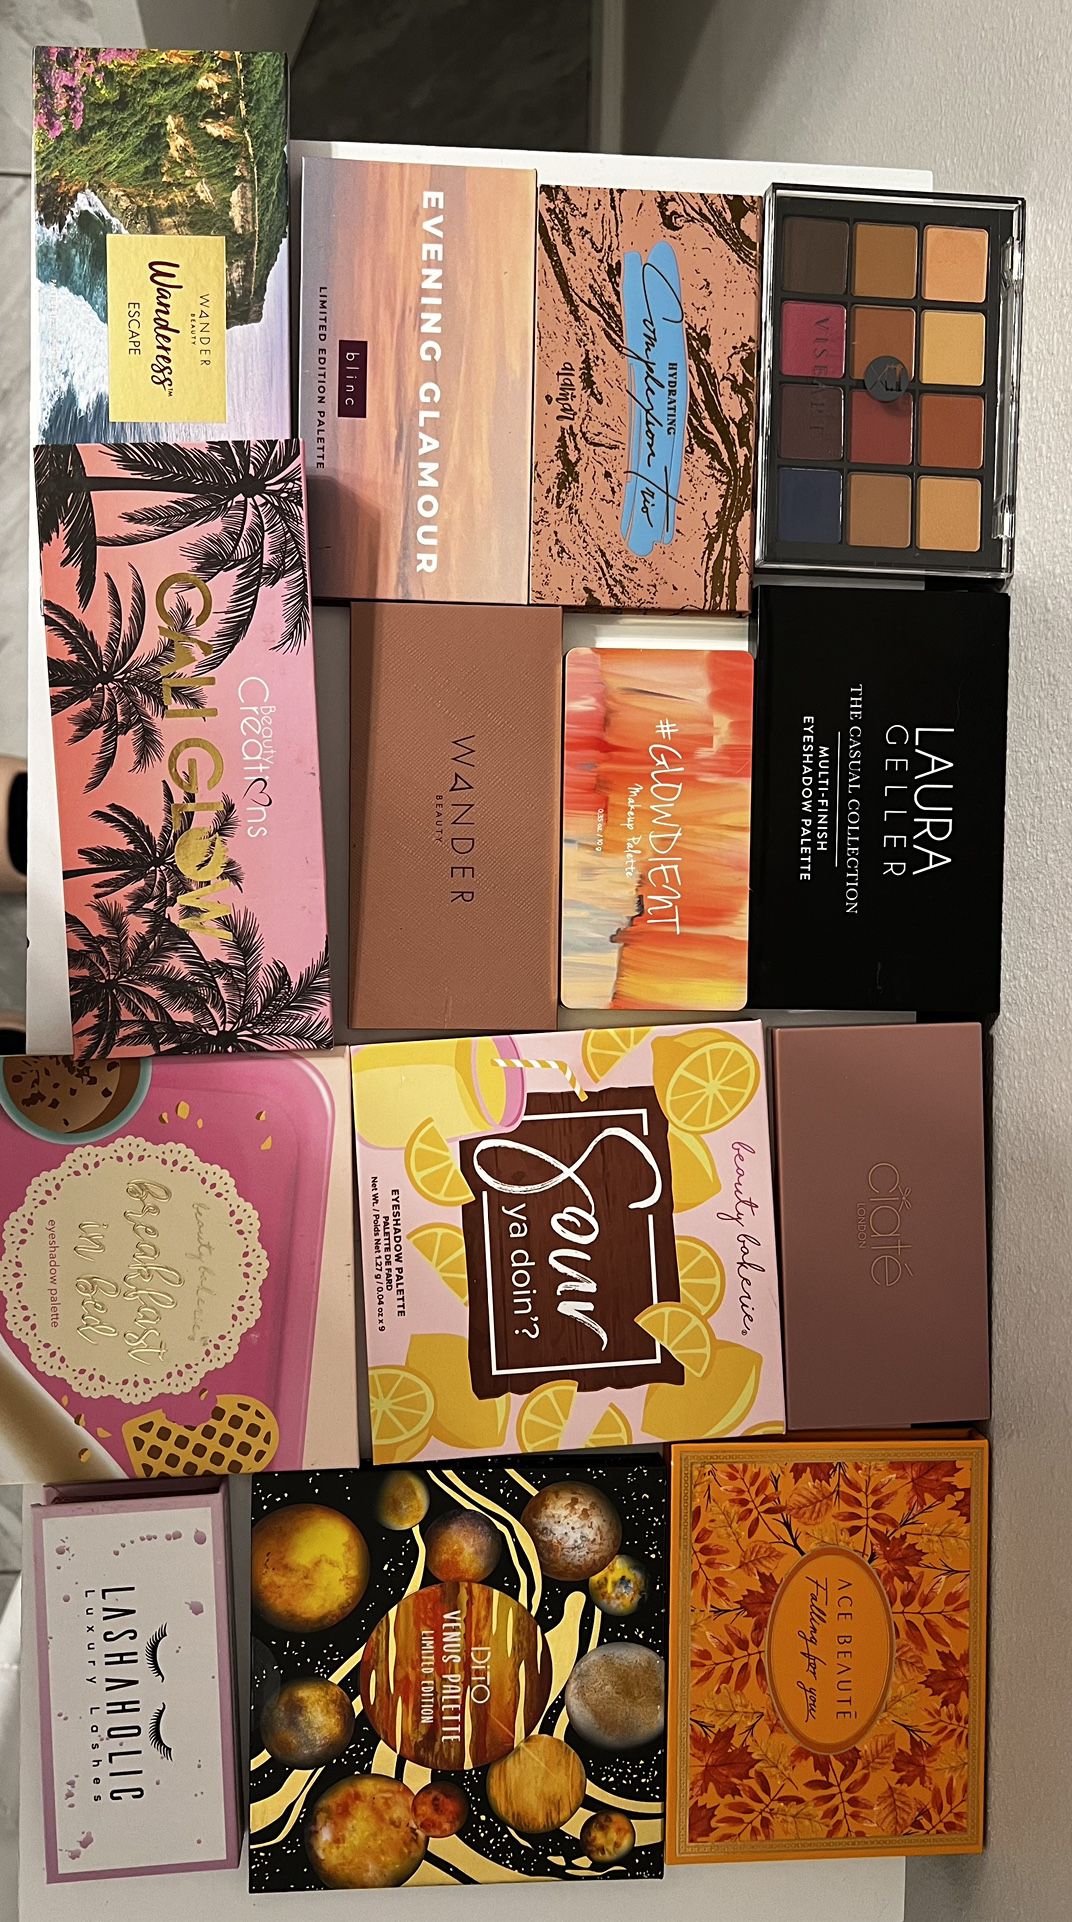 Never Used Makeup Haul - From Beauty Subscriptions